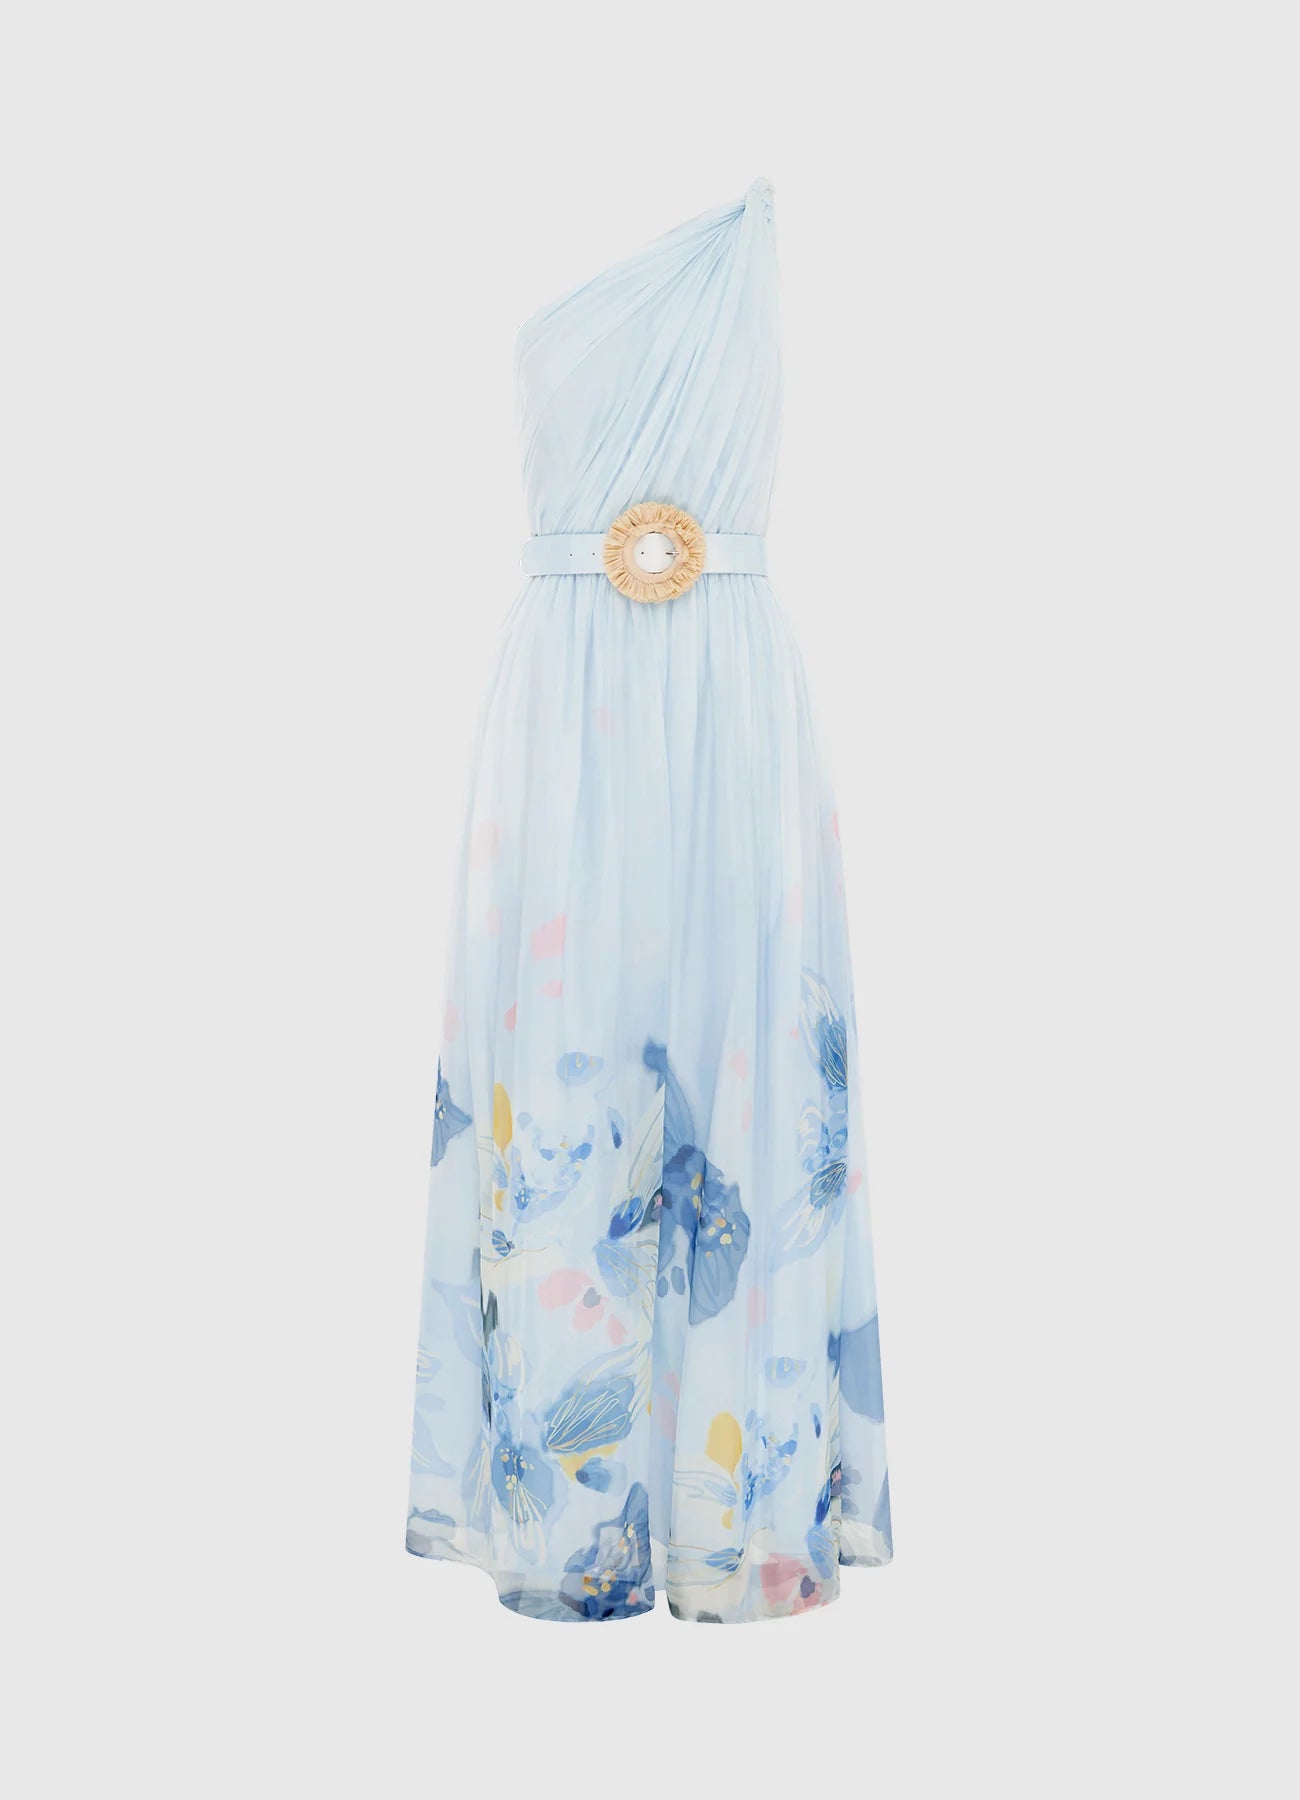 LEO LIN - Adriana One Shoulder Maxi Dress in Tranquility